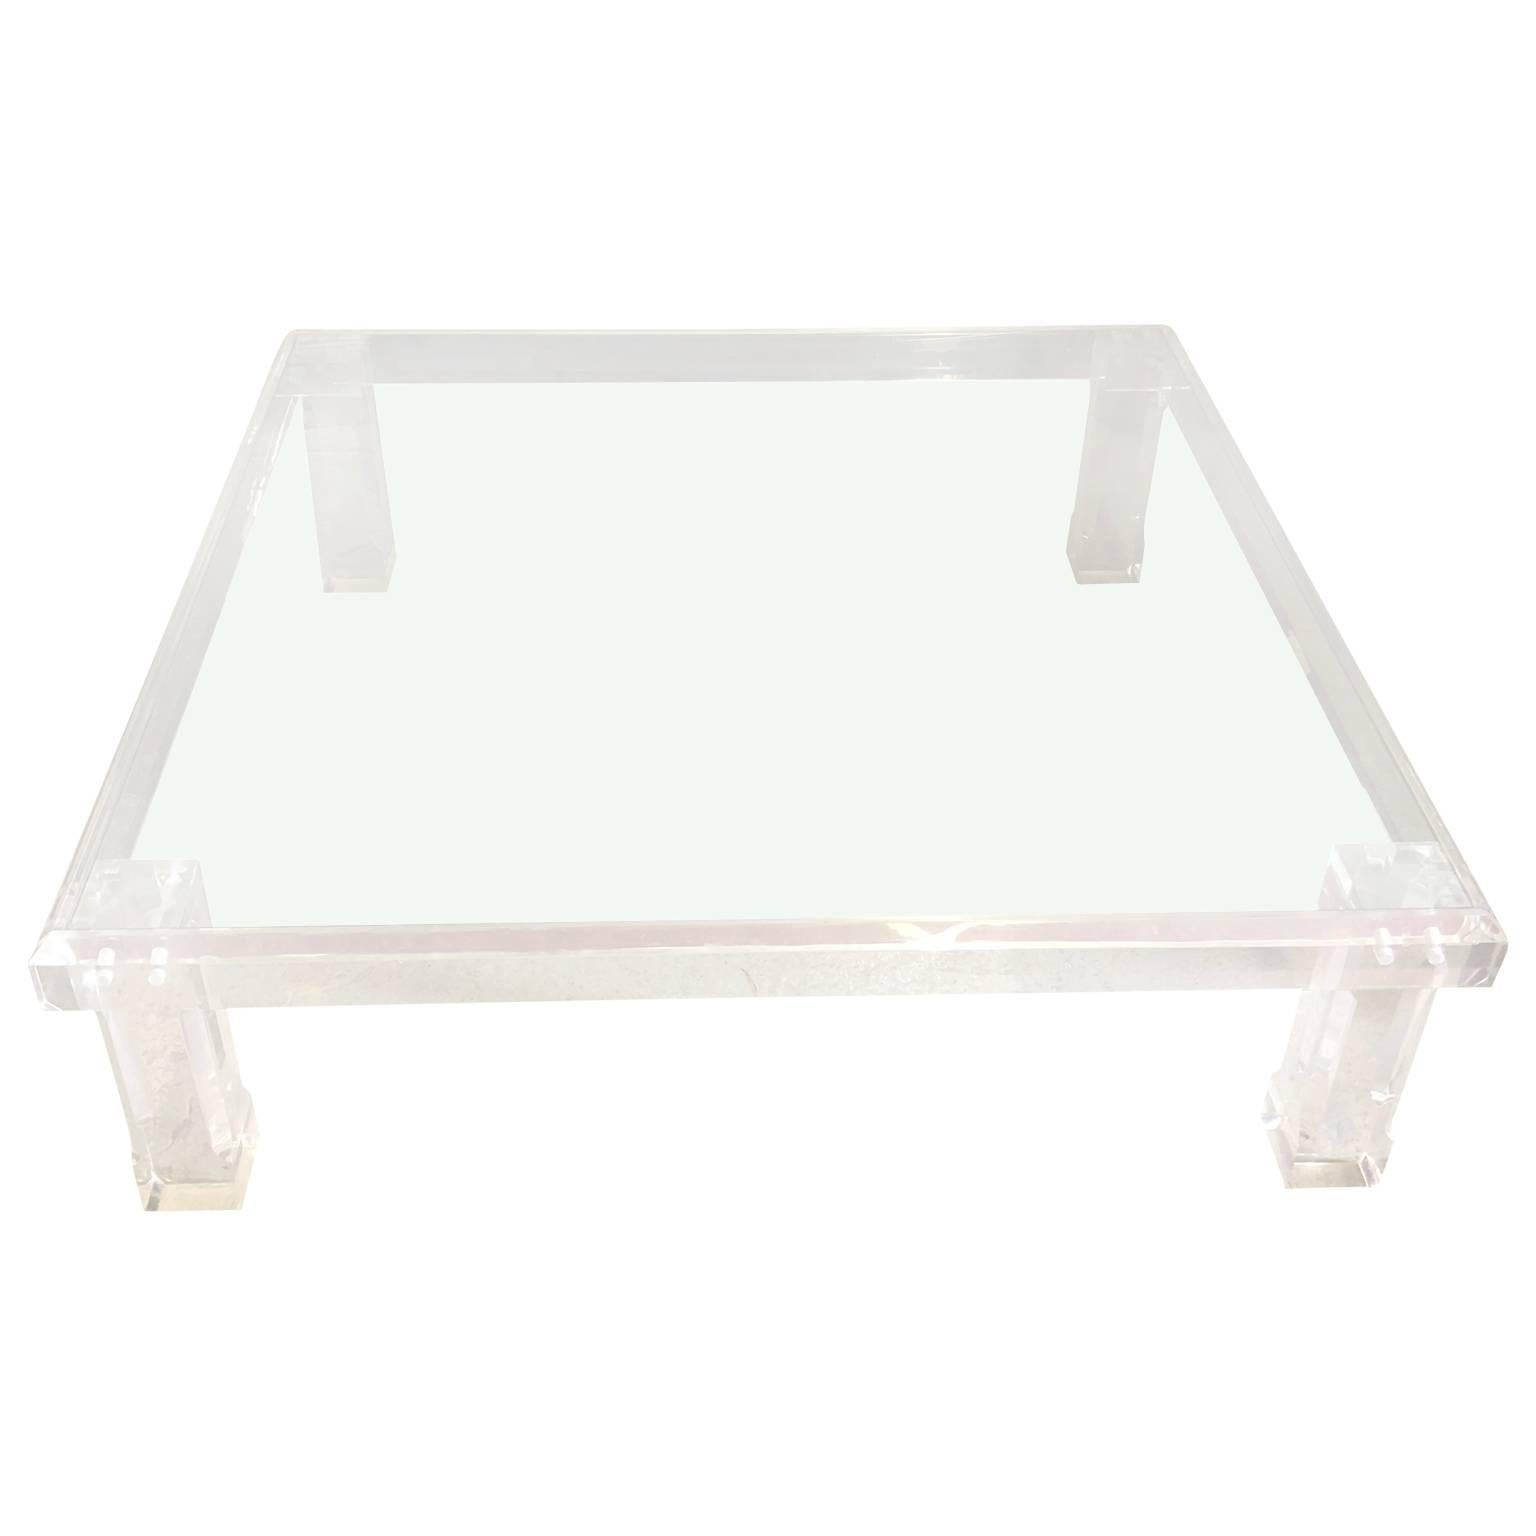 Large lucite cocktail and coffee table with a square 1/4 inch glass top. The outstanding lucite table is oversized and perfect for a large seating modern area. The sturdy, thick legs proudly hold a substantial glass top.